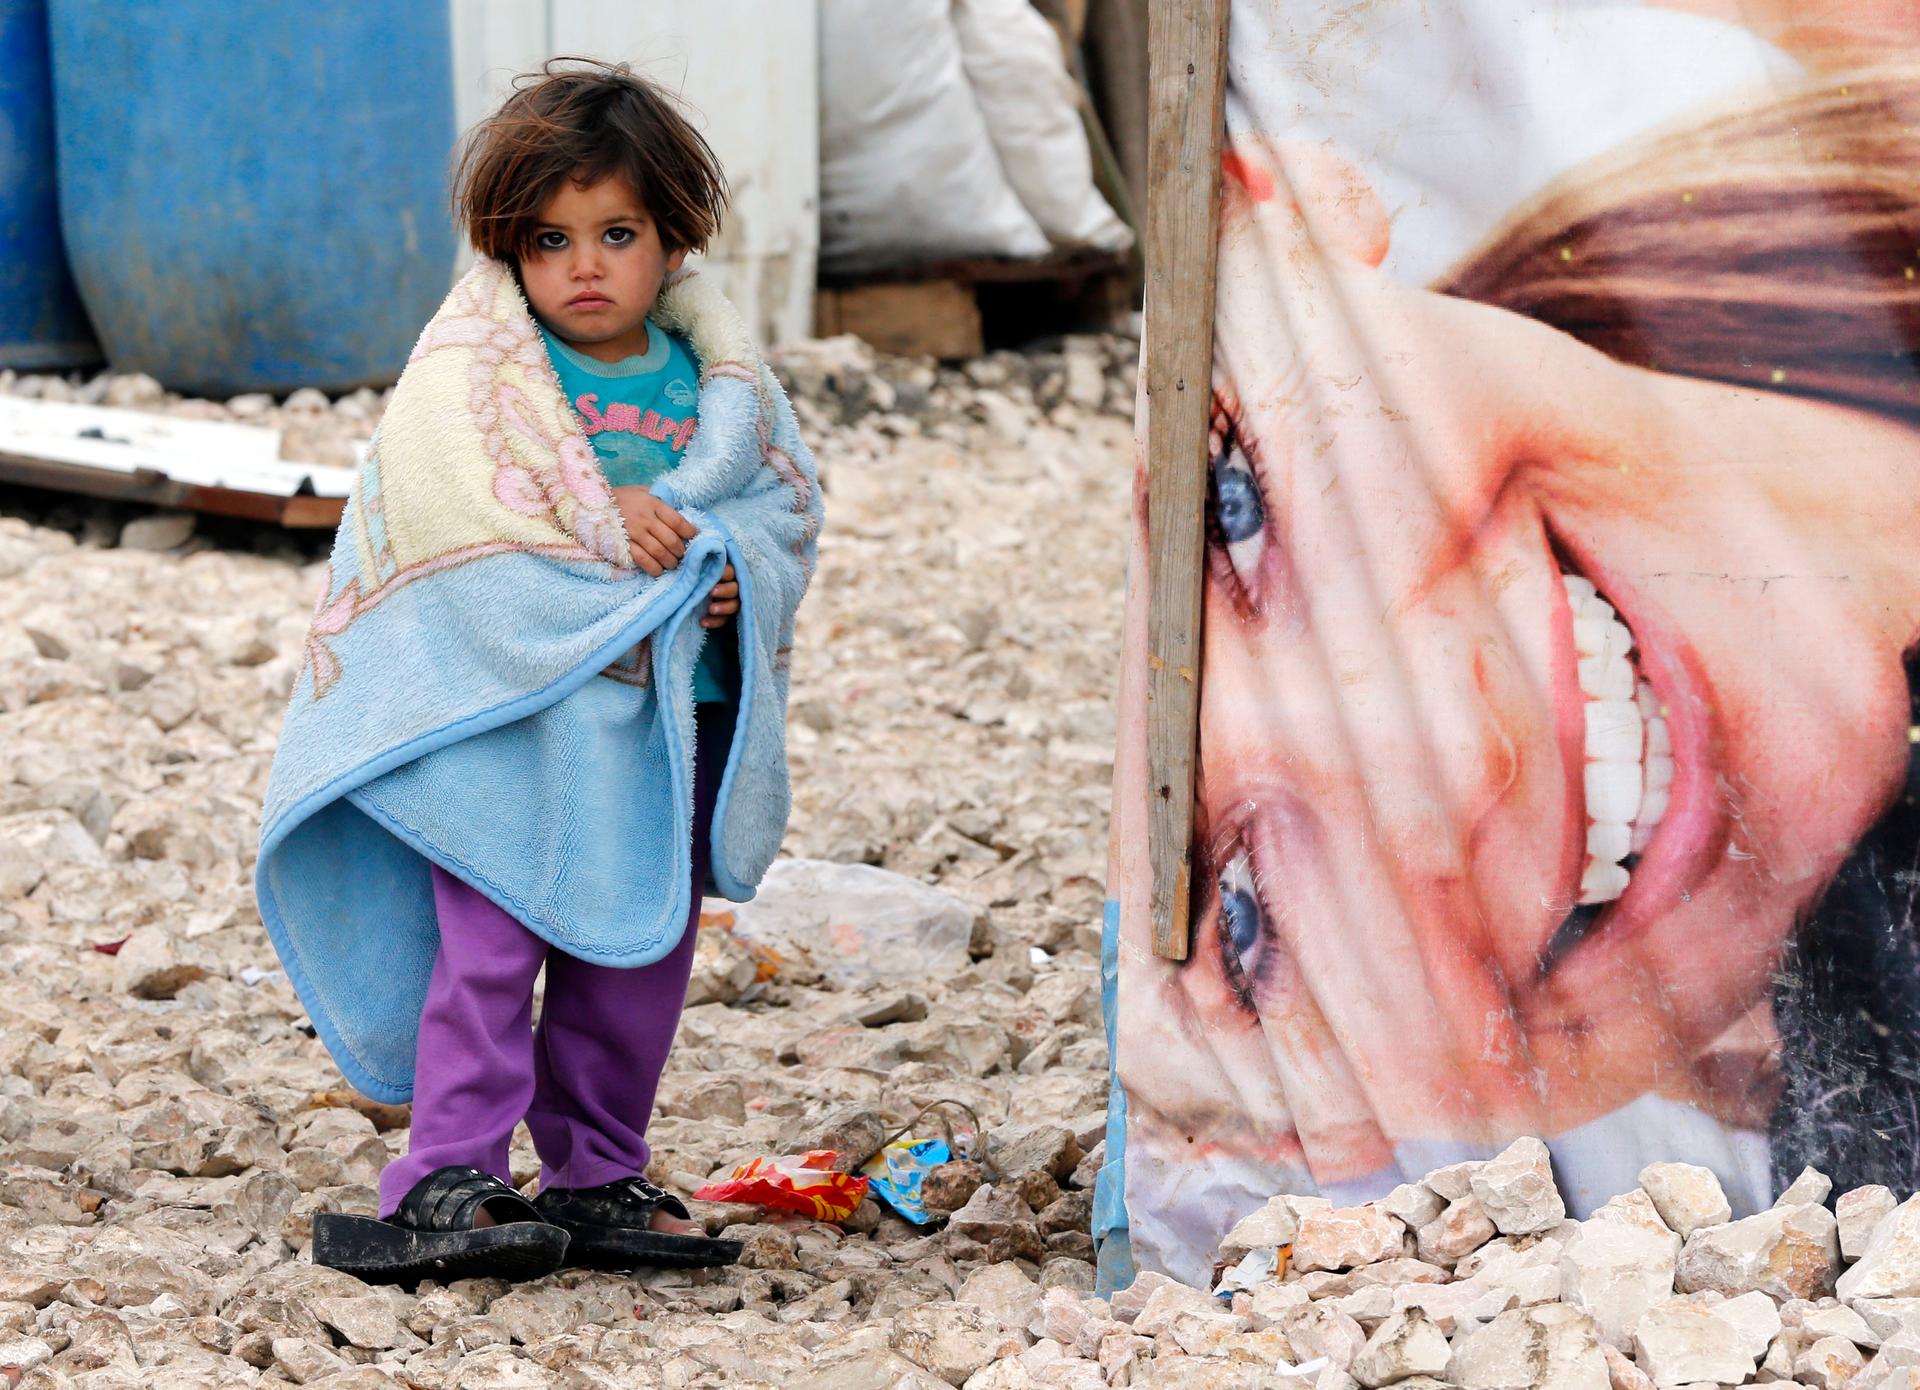 A Syrian girl covers herself with a blanket at a refugee settlement in Bar Elias in Lebanon.